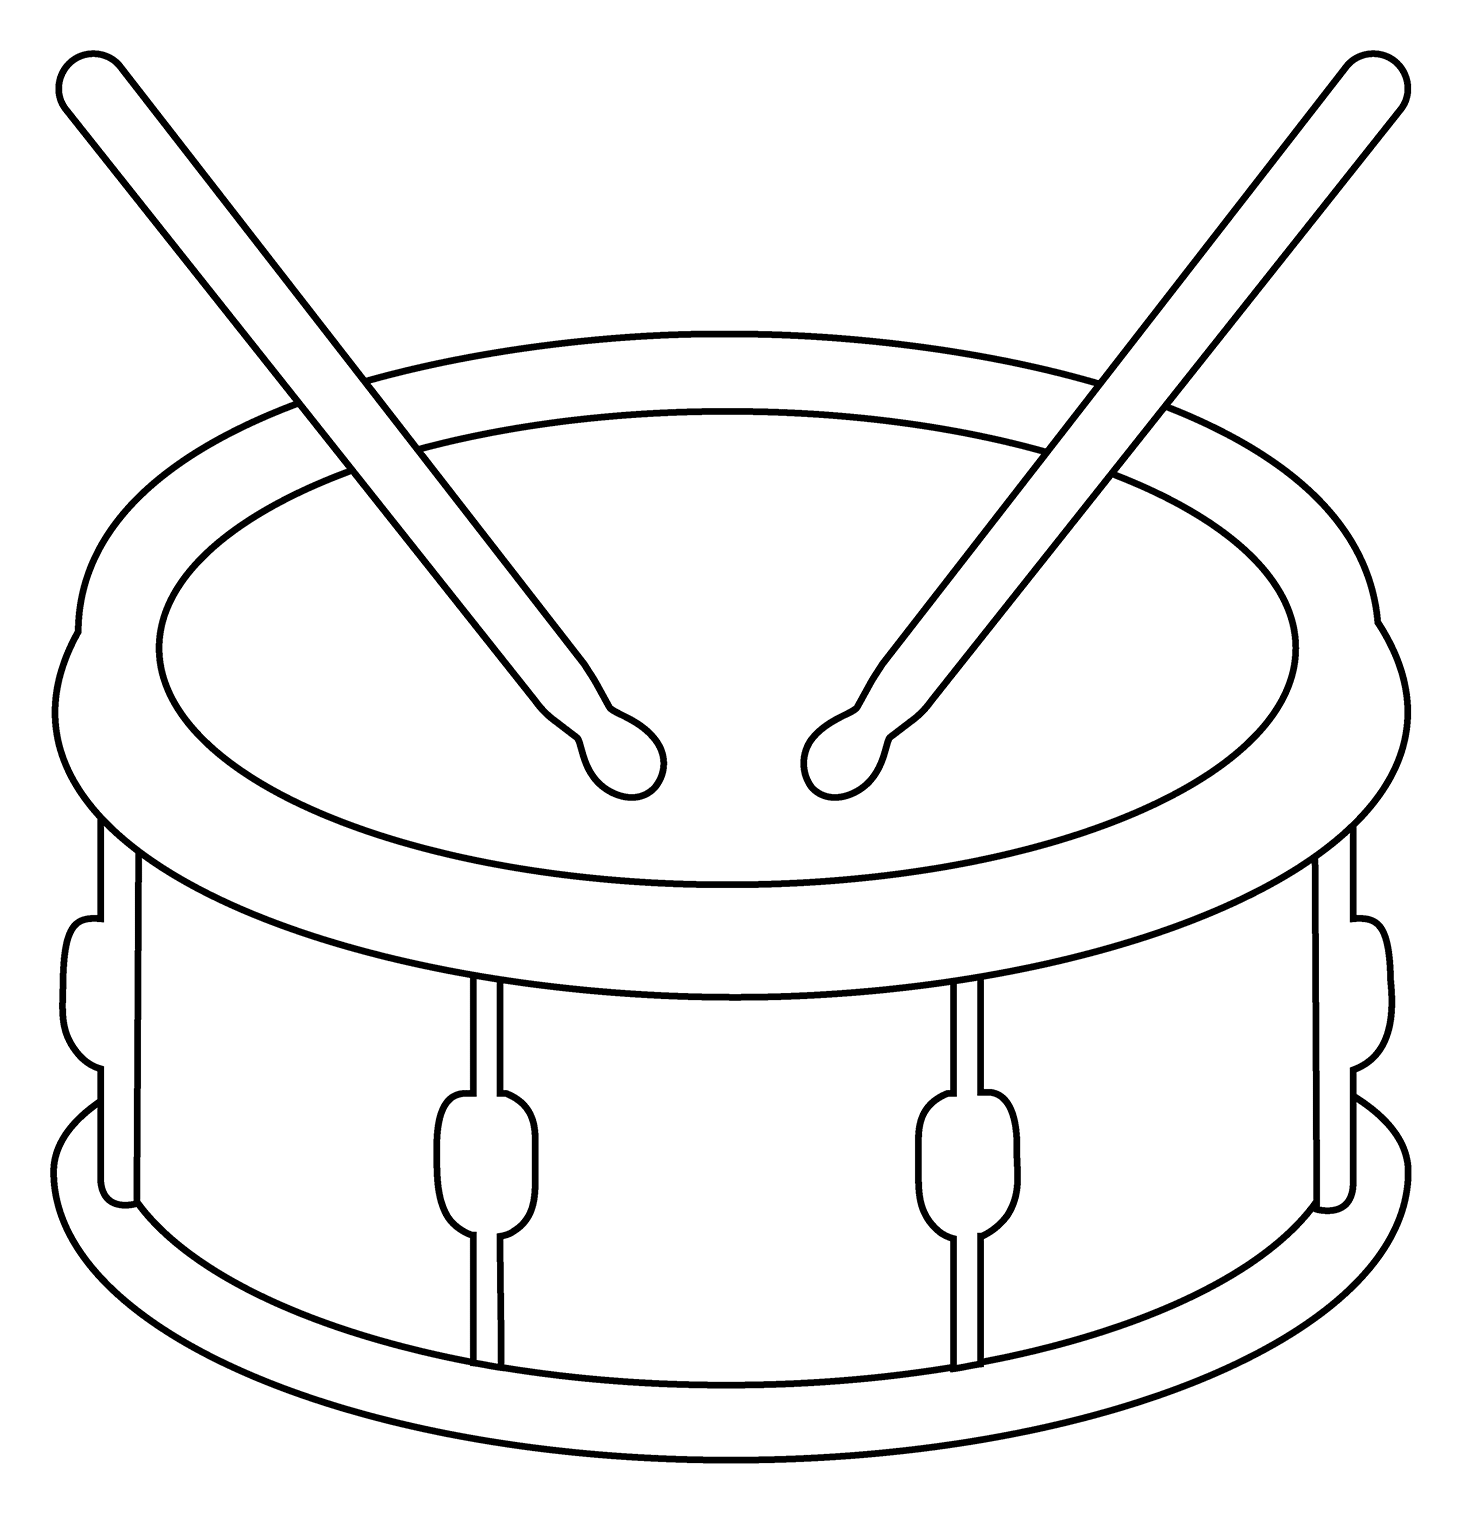 Drum Emoji coloring page - ColouringPages